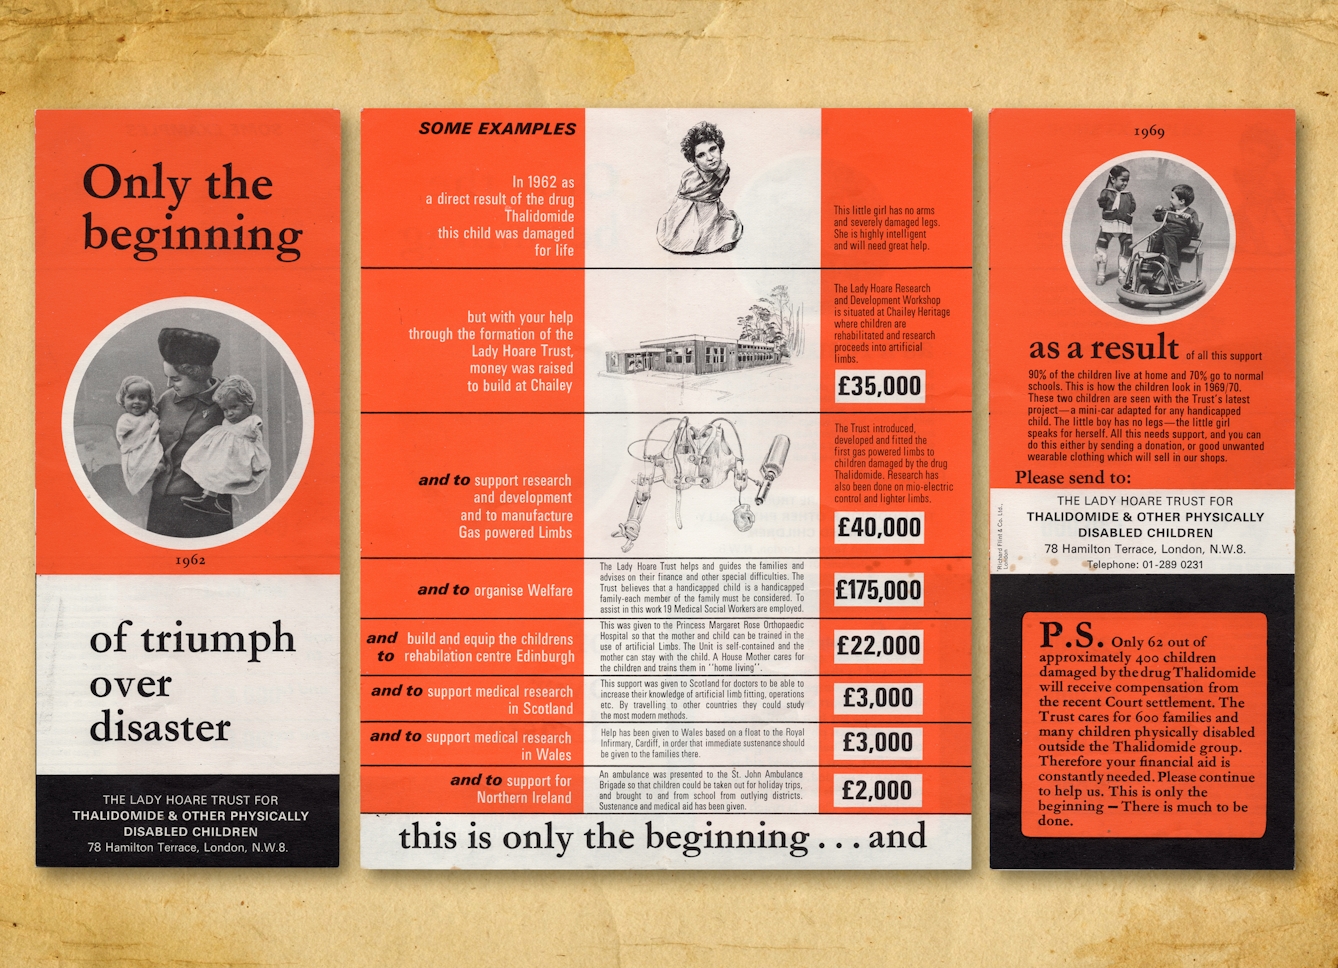 Photograph of a colourful campaign leaflet from the 1960s, resting on a brown paper textured background. The leaflet is shown in three parts, the front, the inside and the back. When folded it is a tall thin leaflet. The cover not he left is split into 3 horizontal bands, orange at the top, white in the lower half and black at the bottom. In the centre of the leaflet is a black and white photograph, set within a white ringed circle, of a woman wearing a hat and holding a small child in each arm. Above the photograph are the words 'One the beginning' and beneath the photograph it continues 'of triumph over disaster'. The inside pages in the centre of the image are also orange, white and black and contain texts which explain examples of the achievements of the charity this leaflet was created by, The Lady Hoare Trust for Thalidomide and Other Physically Disabled Children'. The back of the leaflet which continues on the right of the image shows the same colour scheme and more information about the charity.